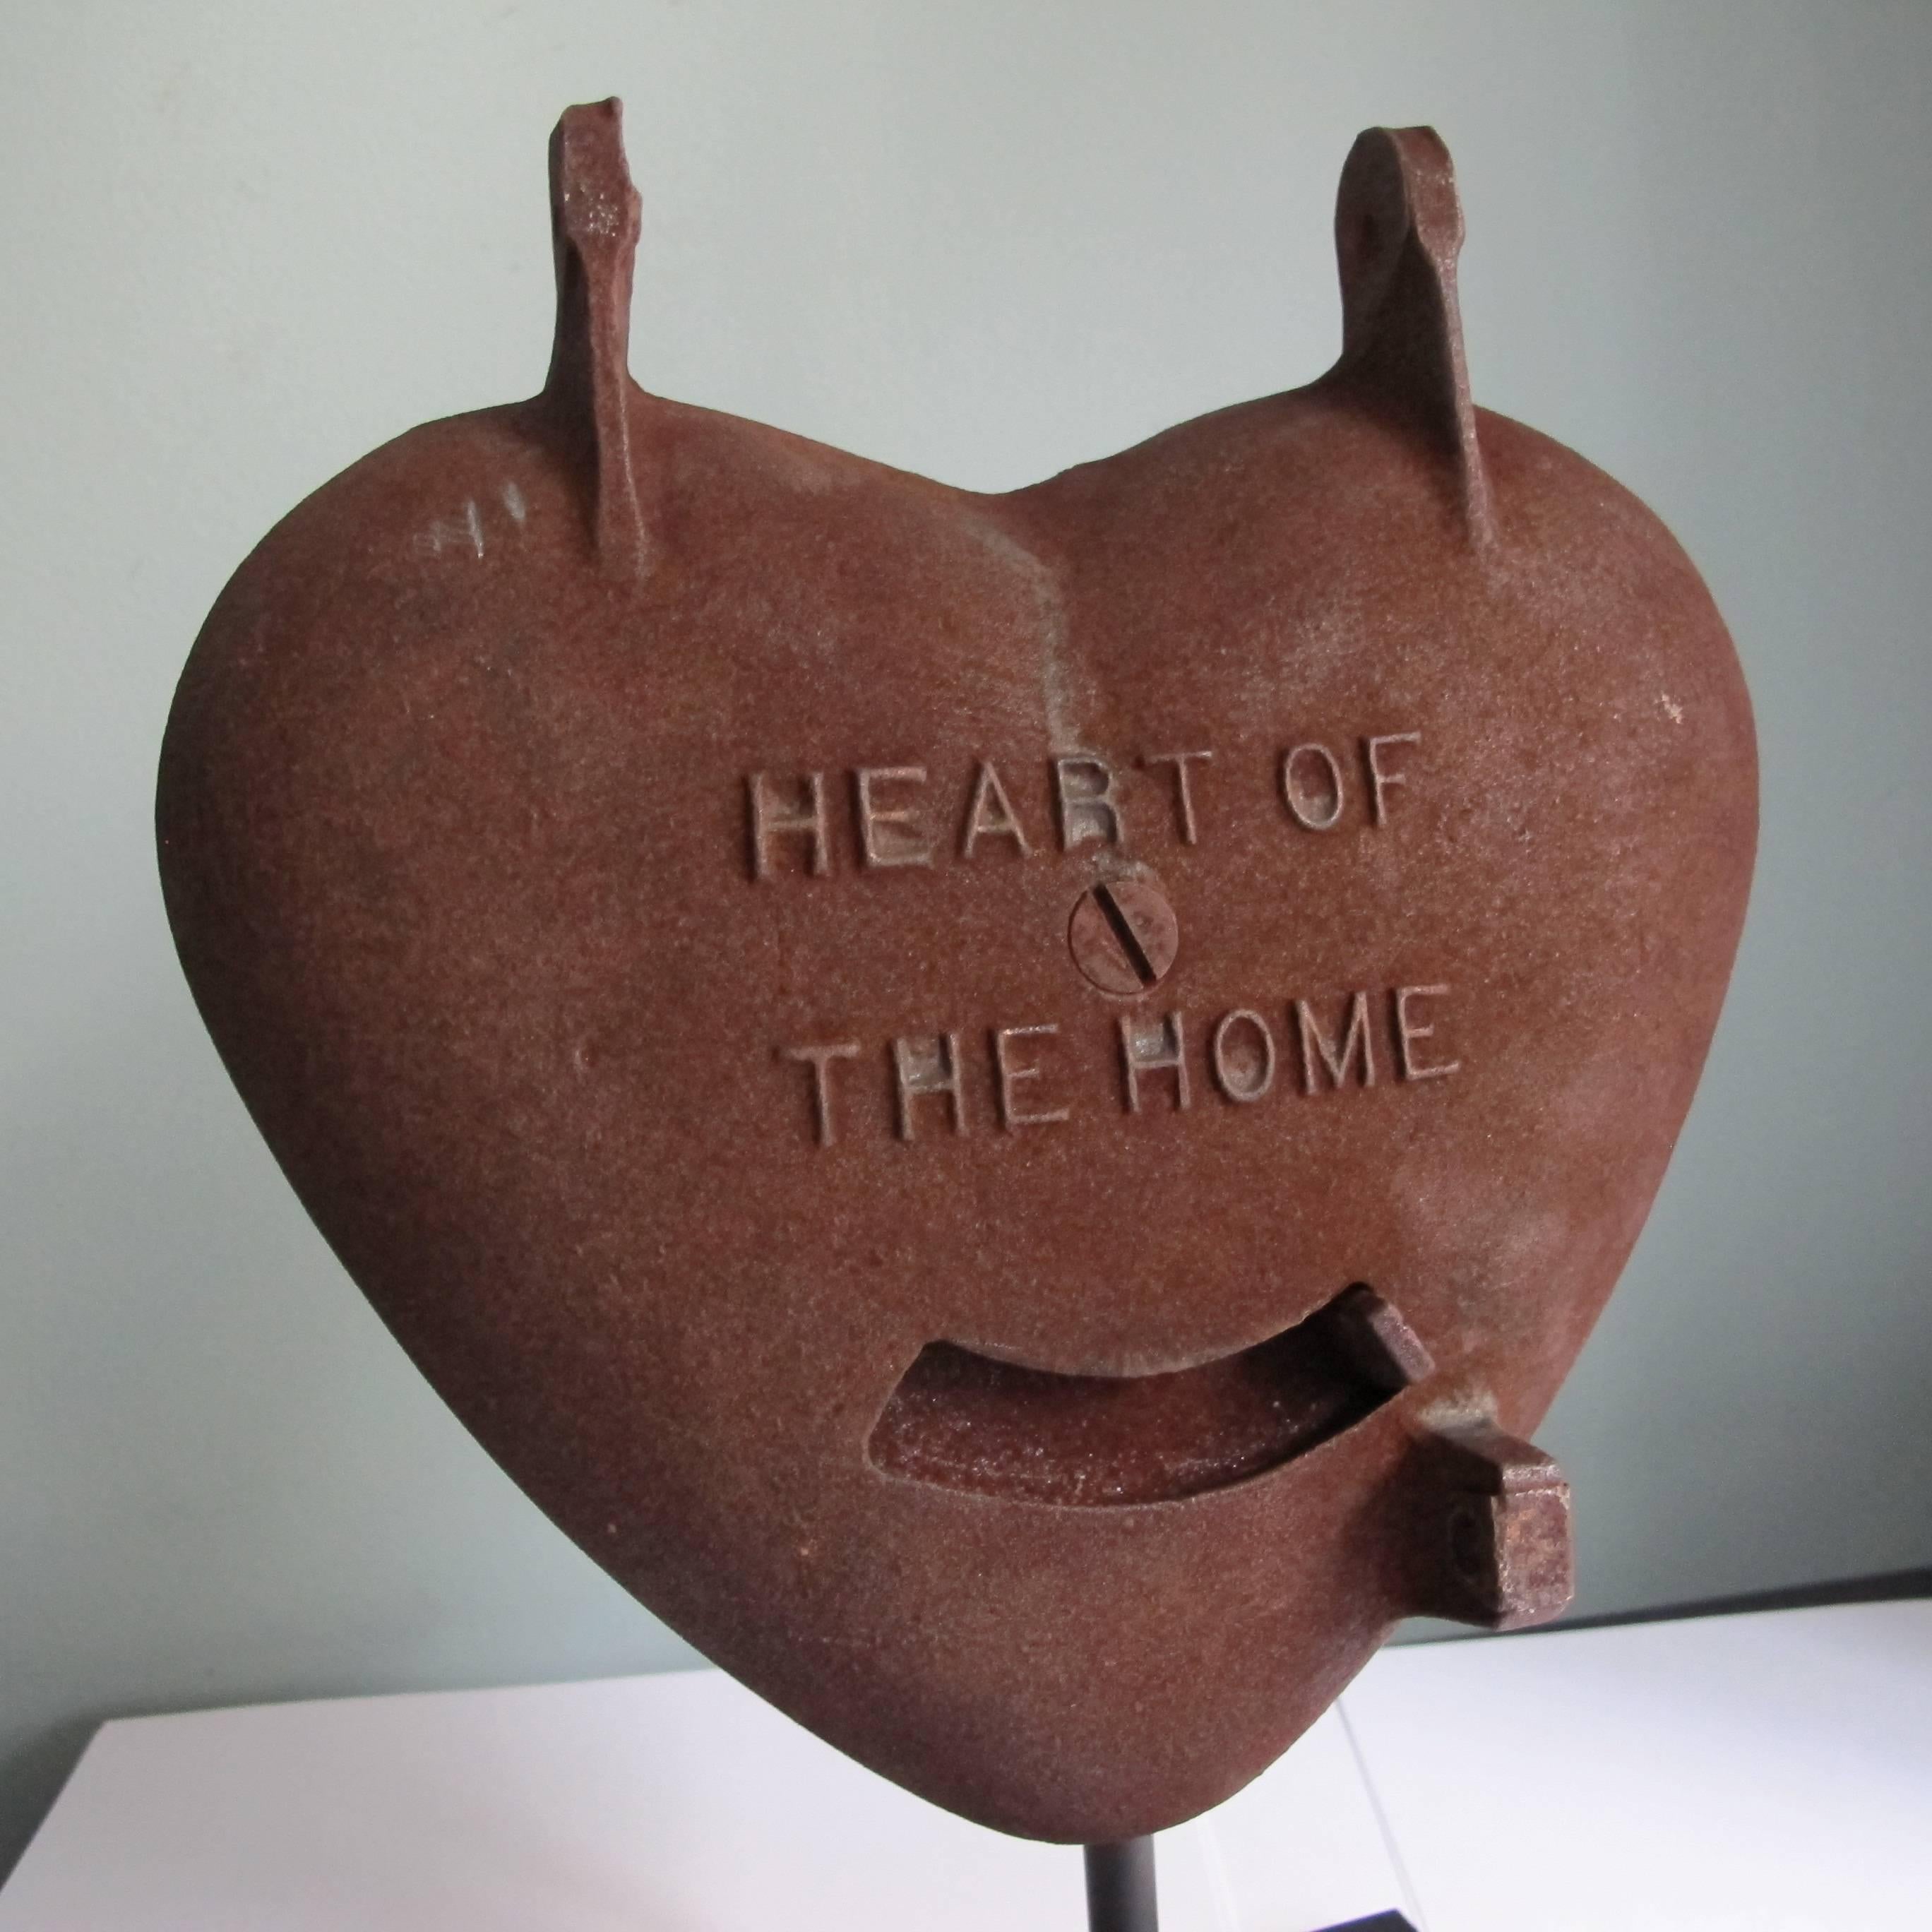 The wood or coal stove used to be the heart of the home. One stove maker around used this sentiment in designing a stove door with a vent shaped like a heart. The heart shaped iron form with top hinges is now mounted over a black metal base as an